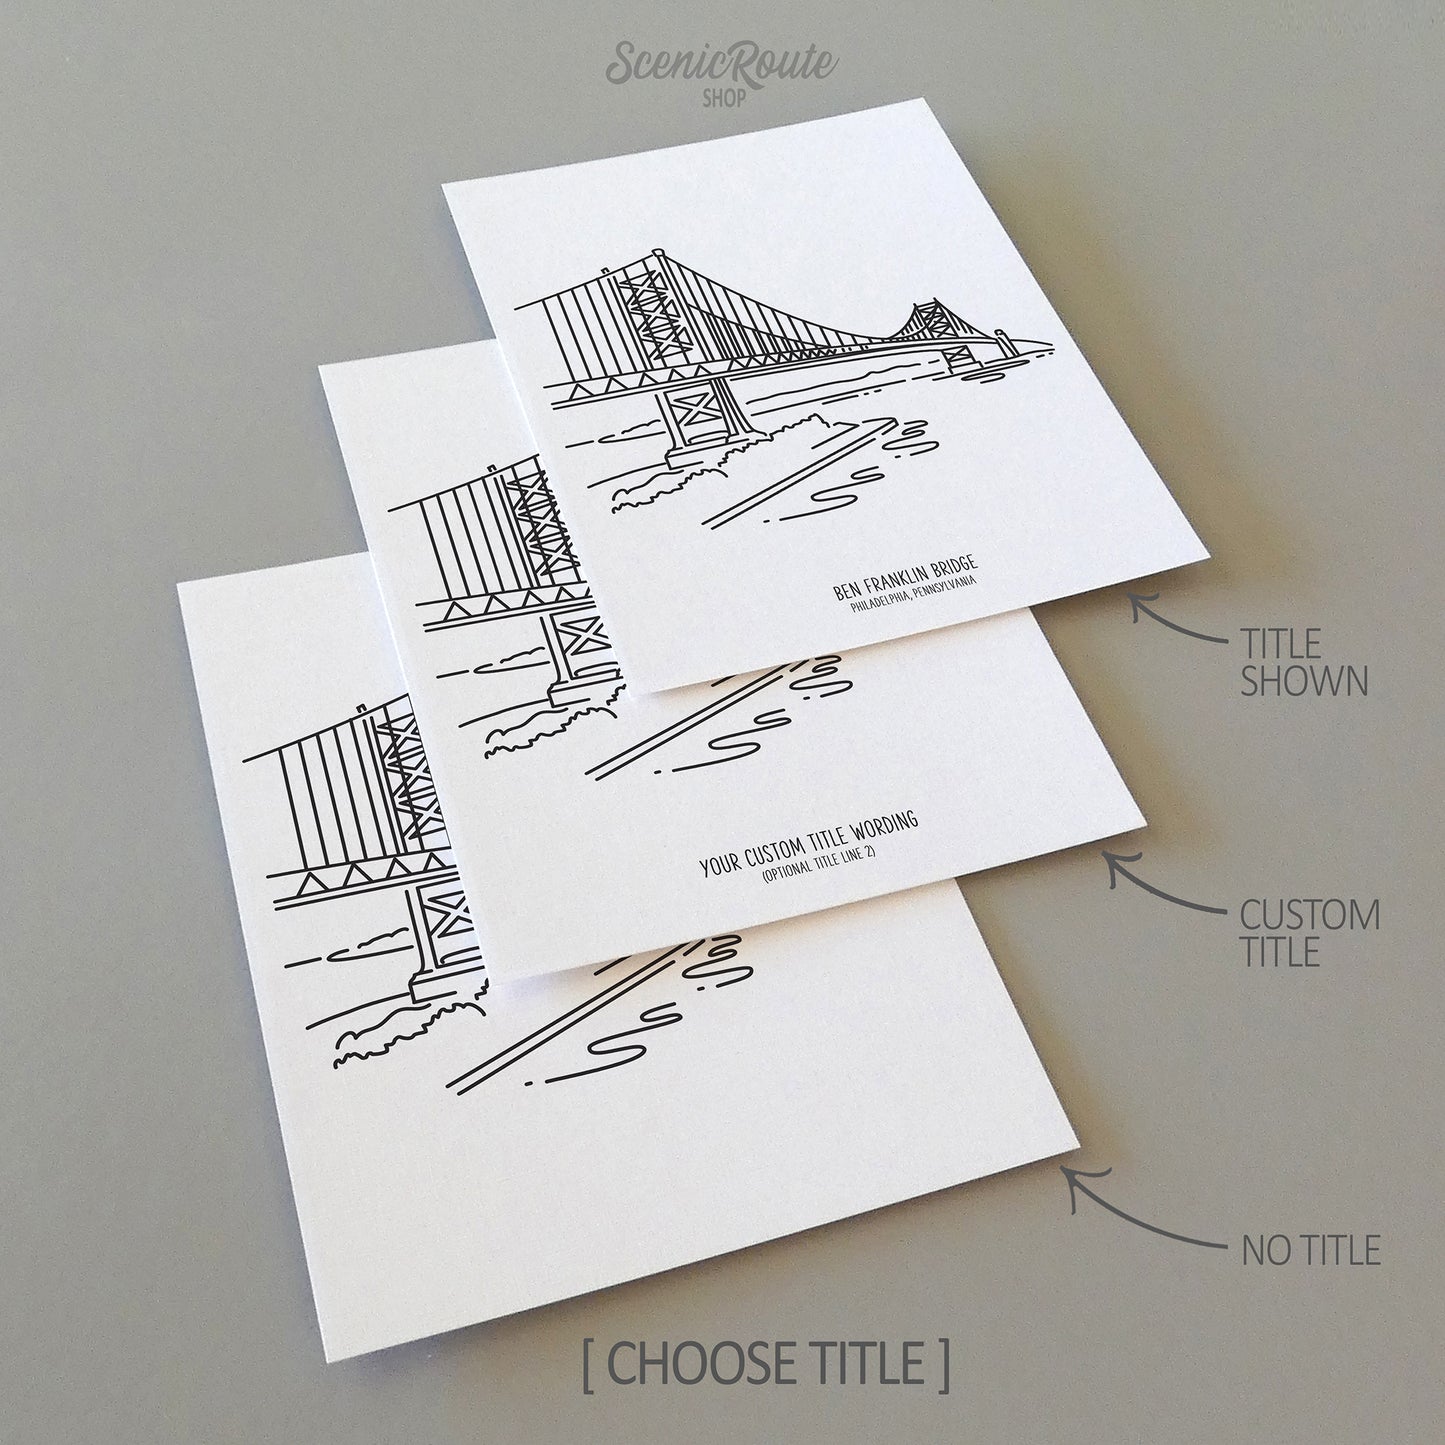 Three line art drawings of the Ben Franklin Bridge in Philadelphia Pennsylvania on white linen paper with a gray background.  The pieces are shown with title options that can be chosen and personalized.